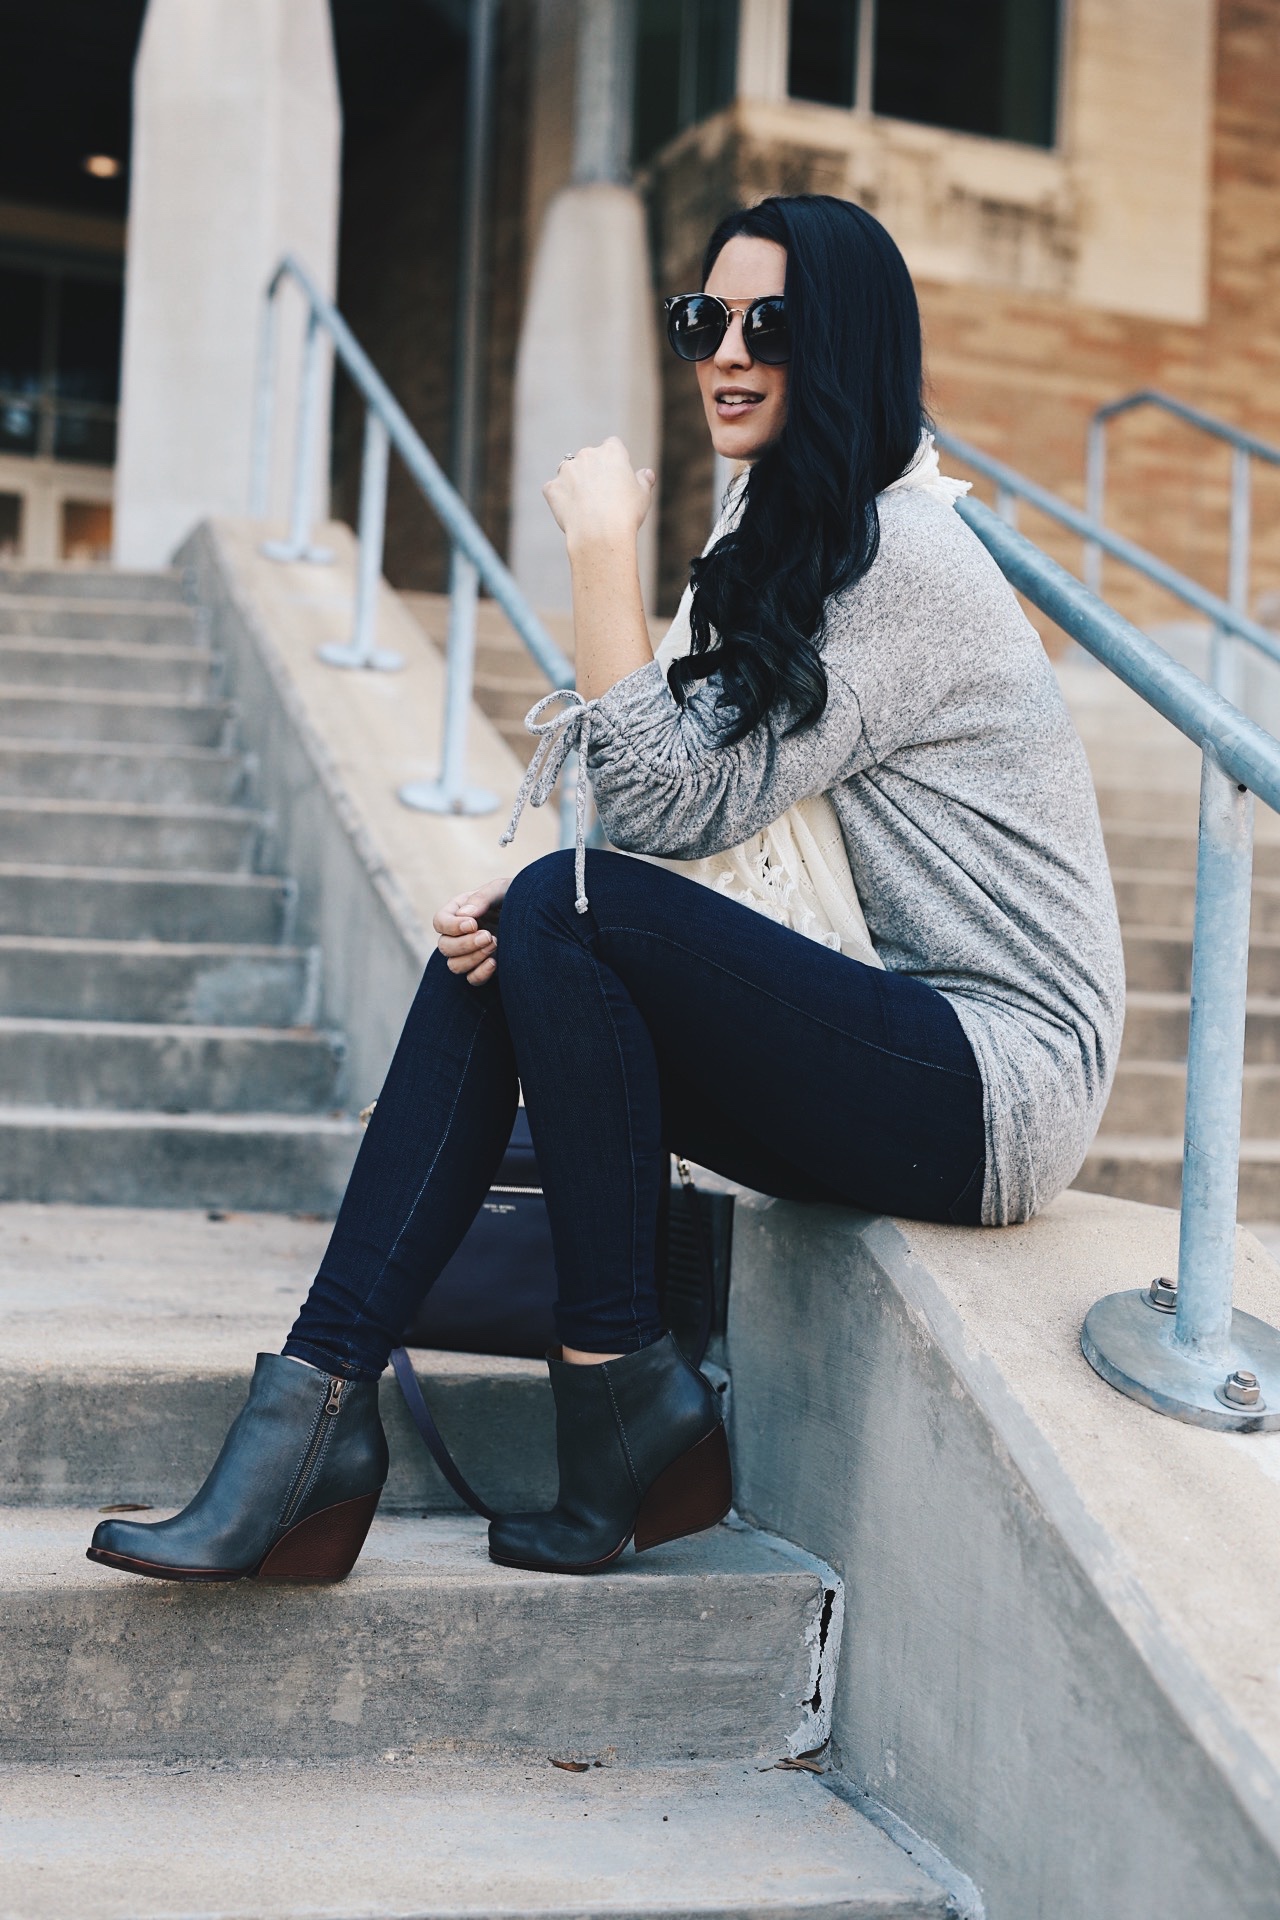 DTKAustin shares why she loves leather shoe brand Kork-Ease and why you should be online shopping at Zappos. | fall fashion tips | fall outfit ideas | fall style tips | what to wear for fall | cool weather fashion | fashion for fall | style tips for fall | outfit ideas for fall || Dressed to Kill